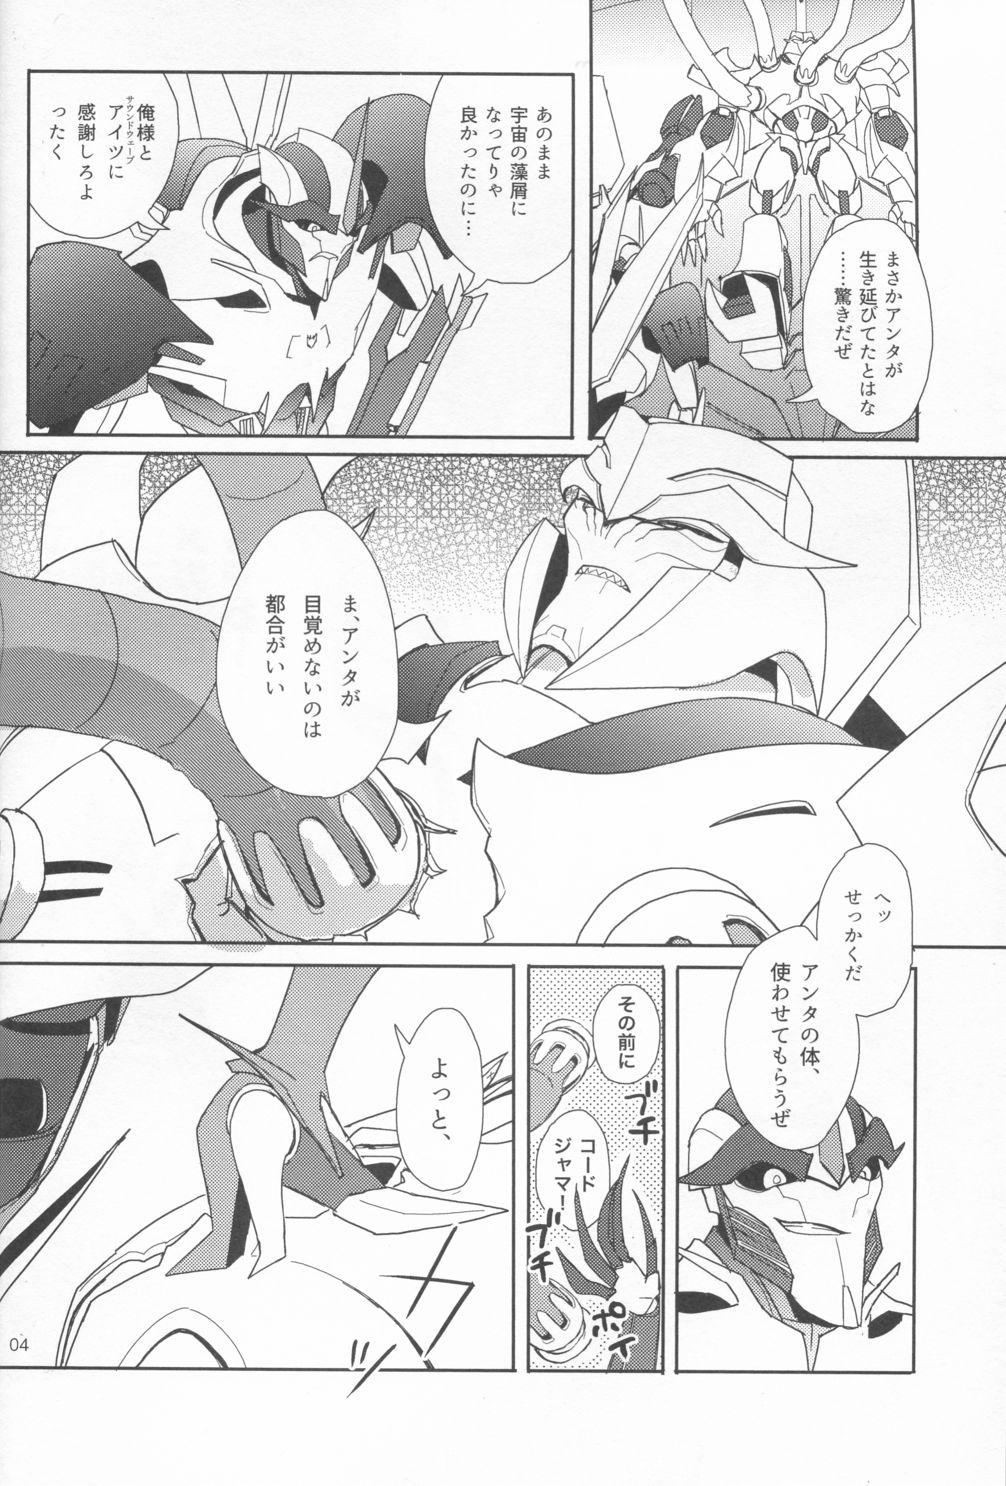 Bed Sleeping Danger - Transformers White - Page 3